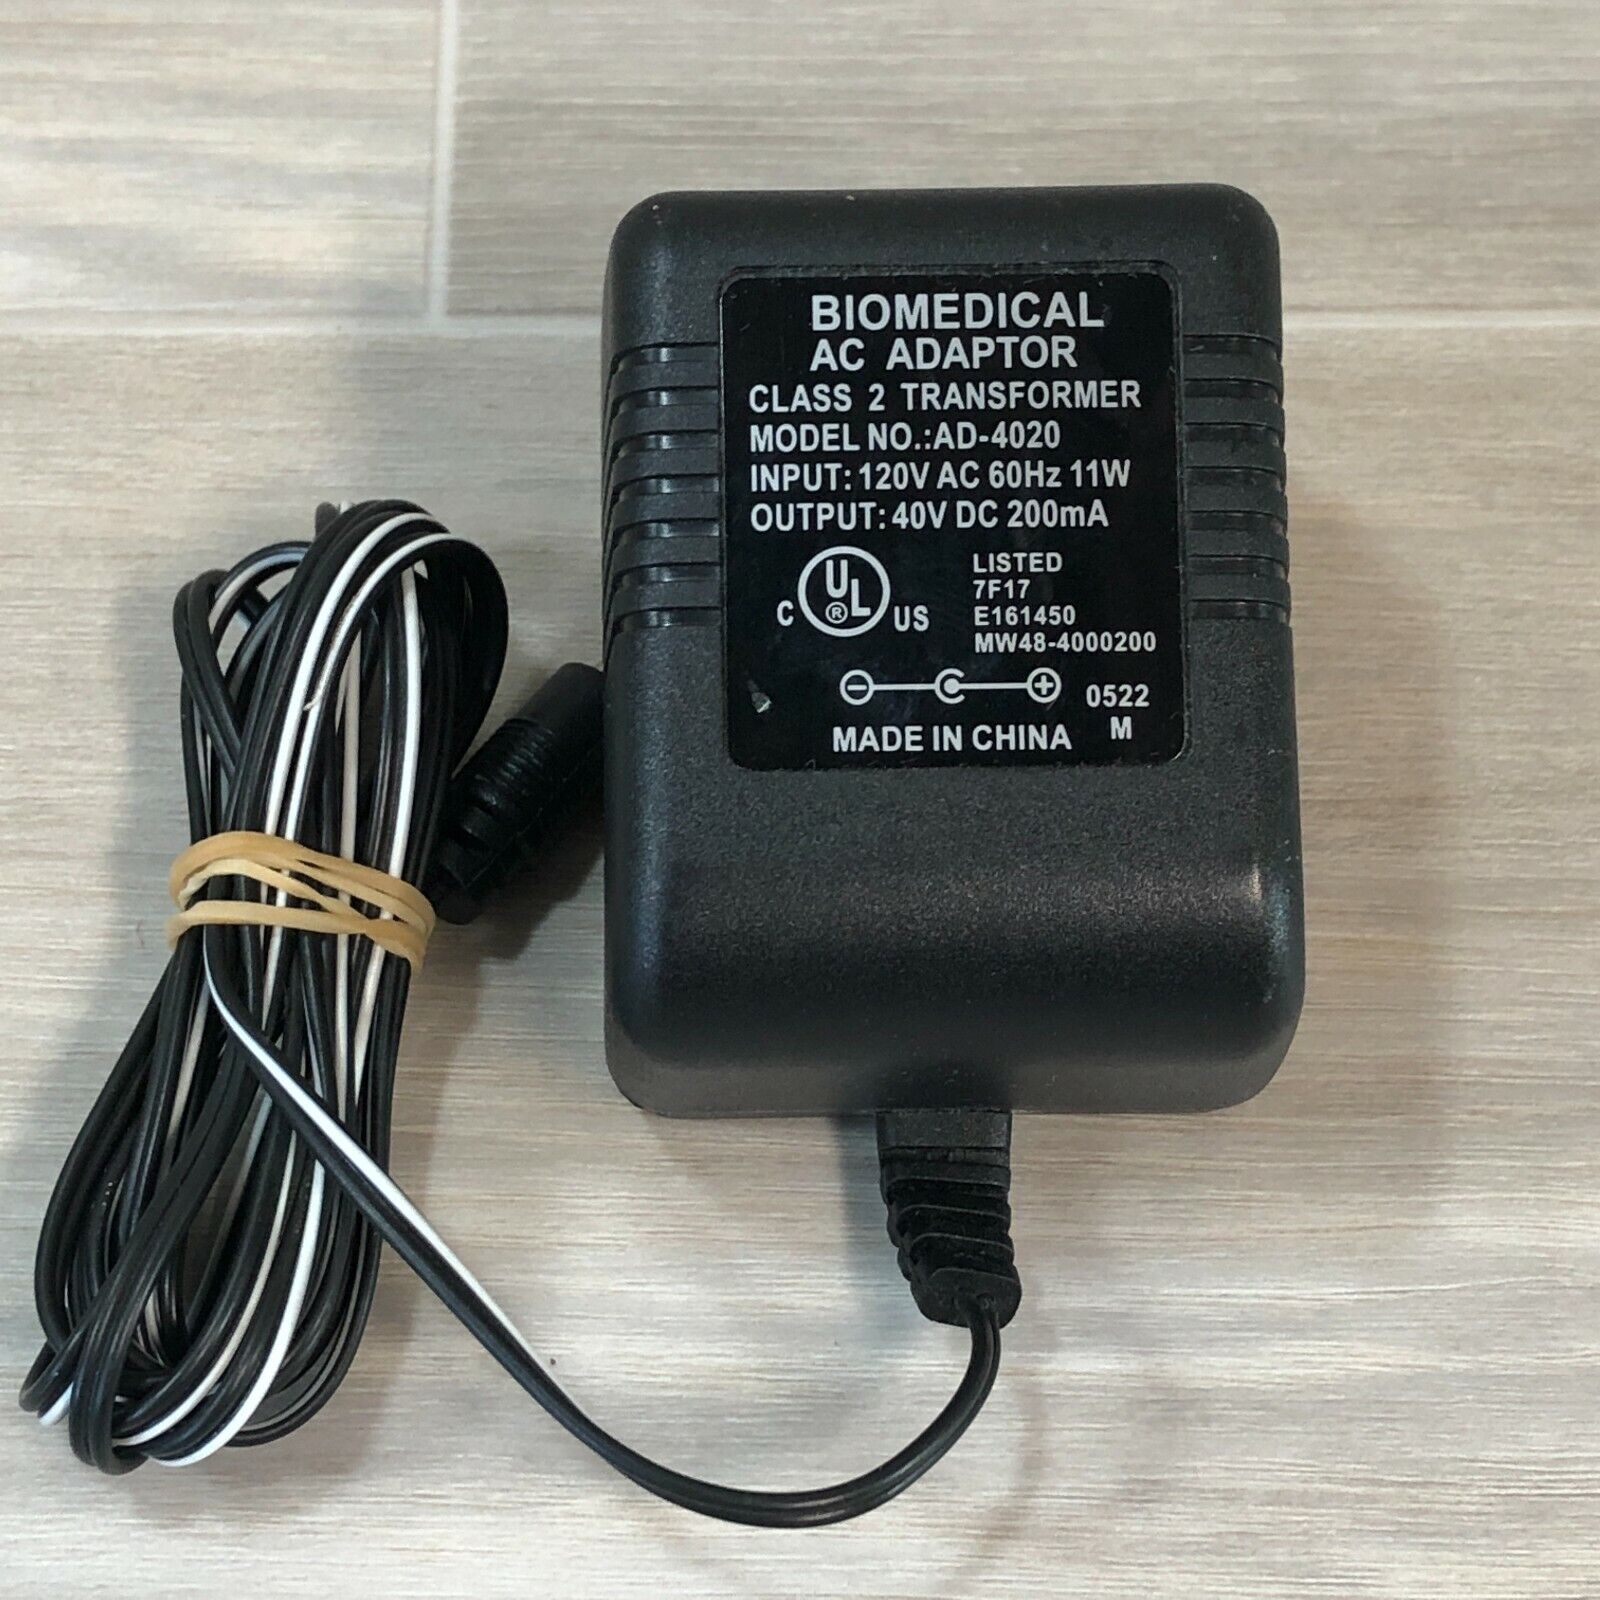 *Brand NEW* 200mA Biomedical AC Adaptor 40VDC AD-4020 AC DC ADAPTER POWER SUPPLY - Click Image to Close